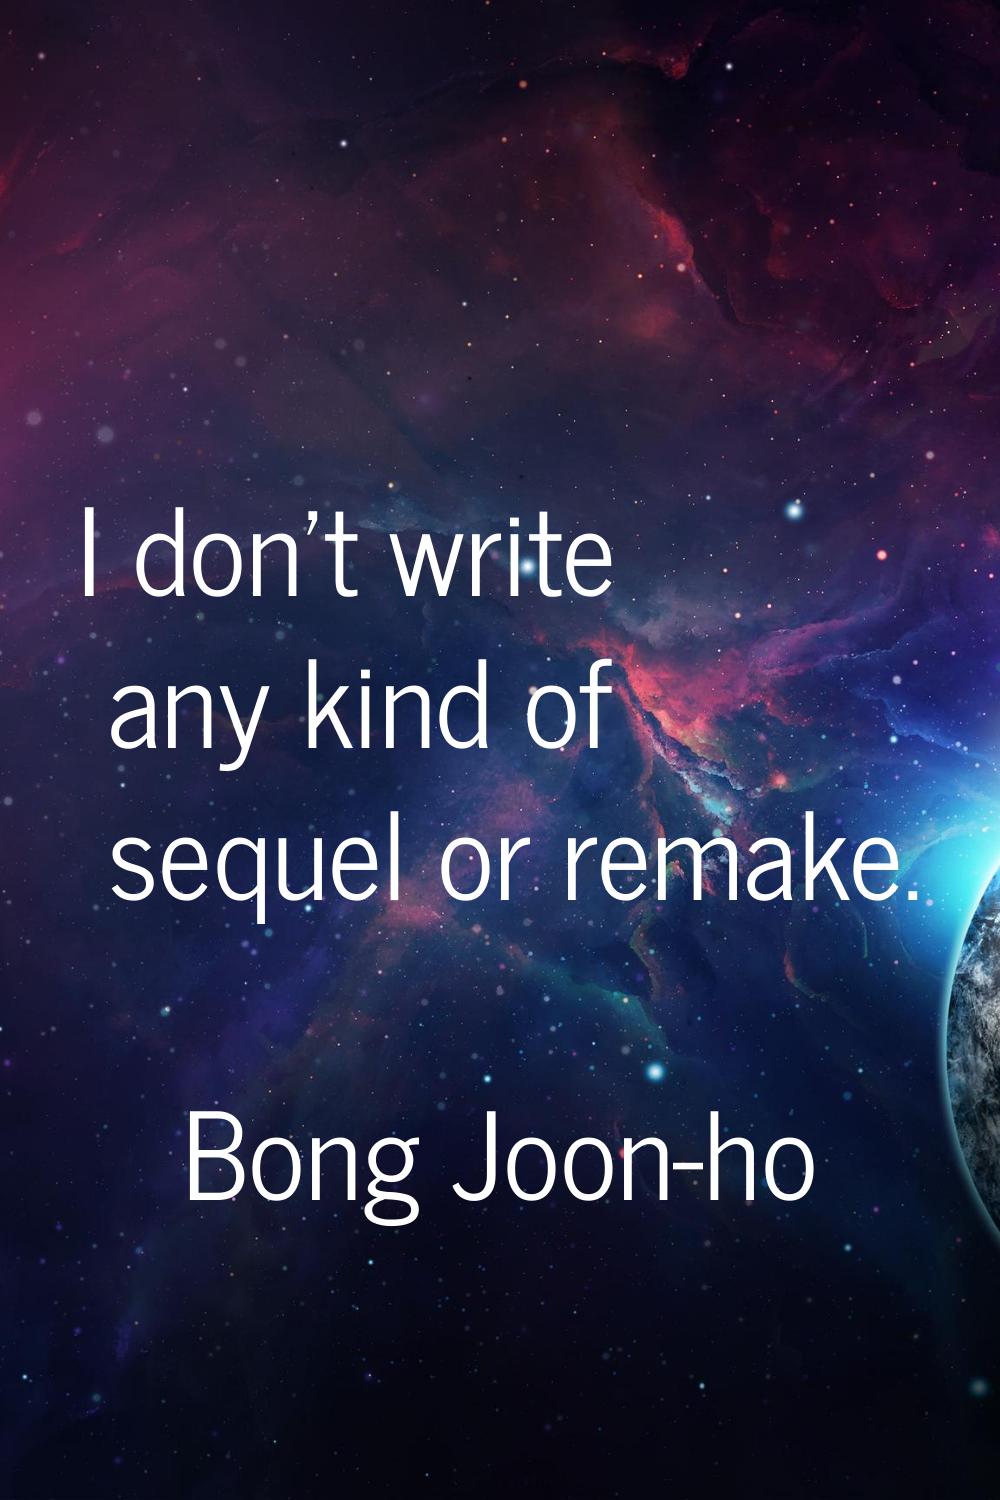 I don't write any kind of sequel or remake.